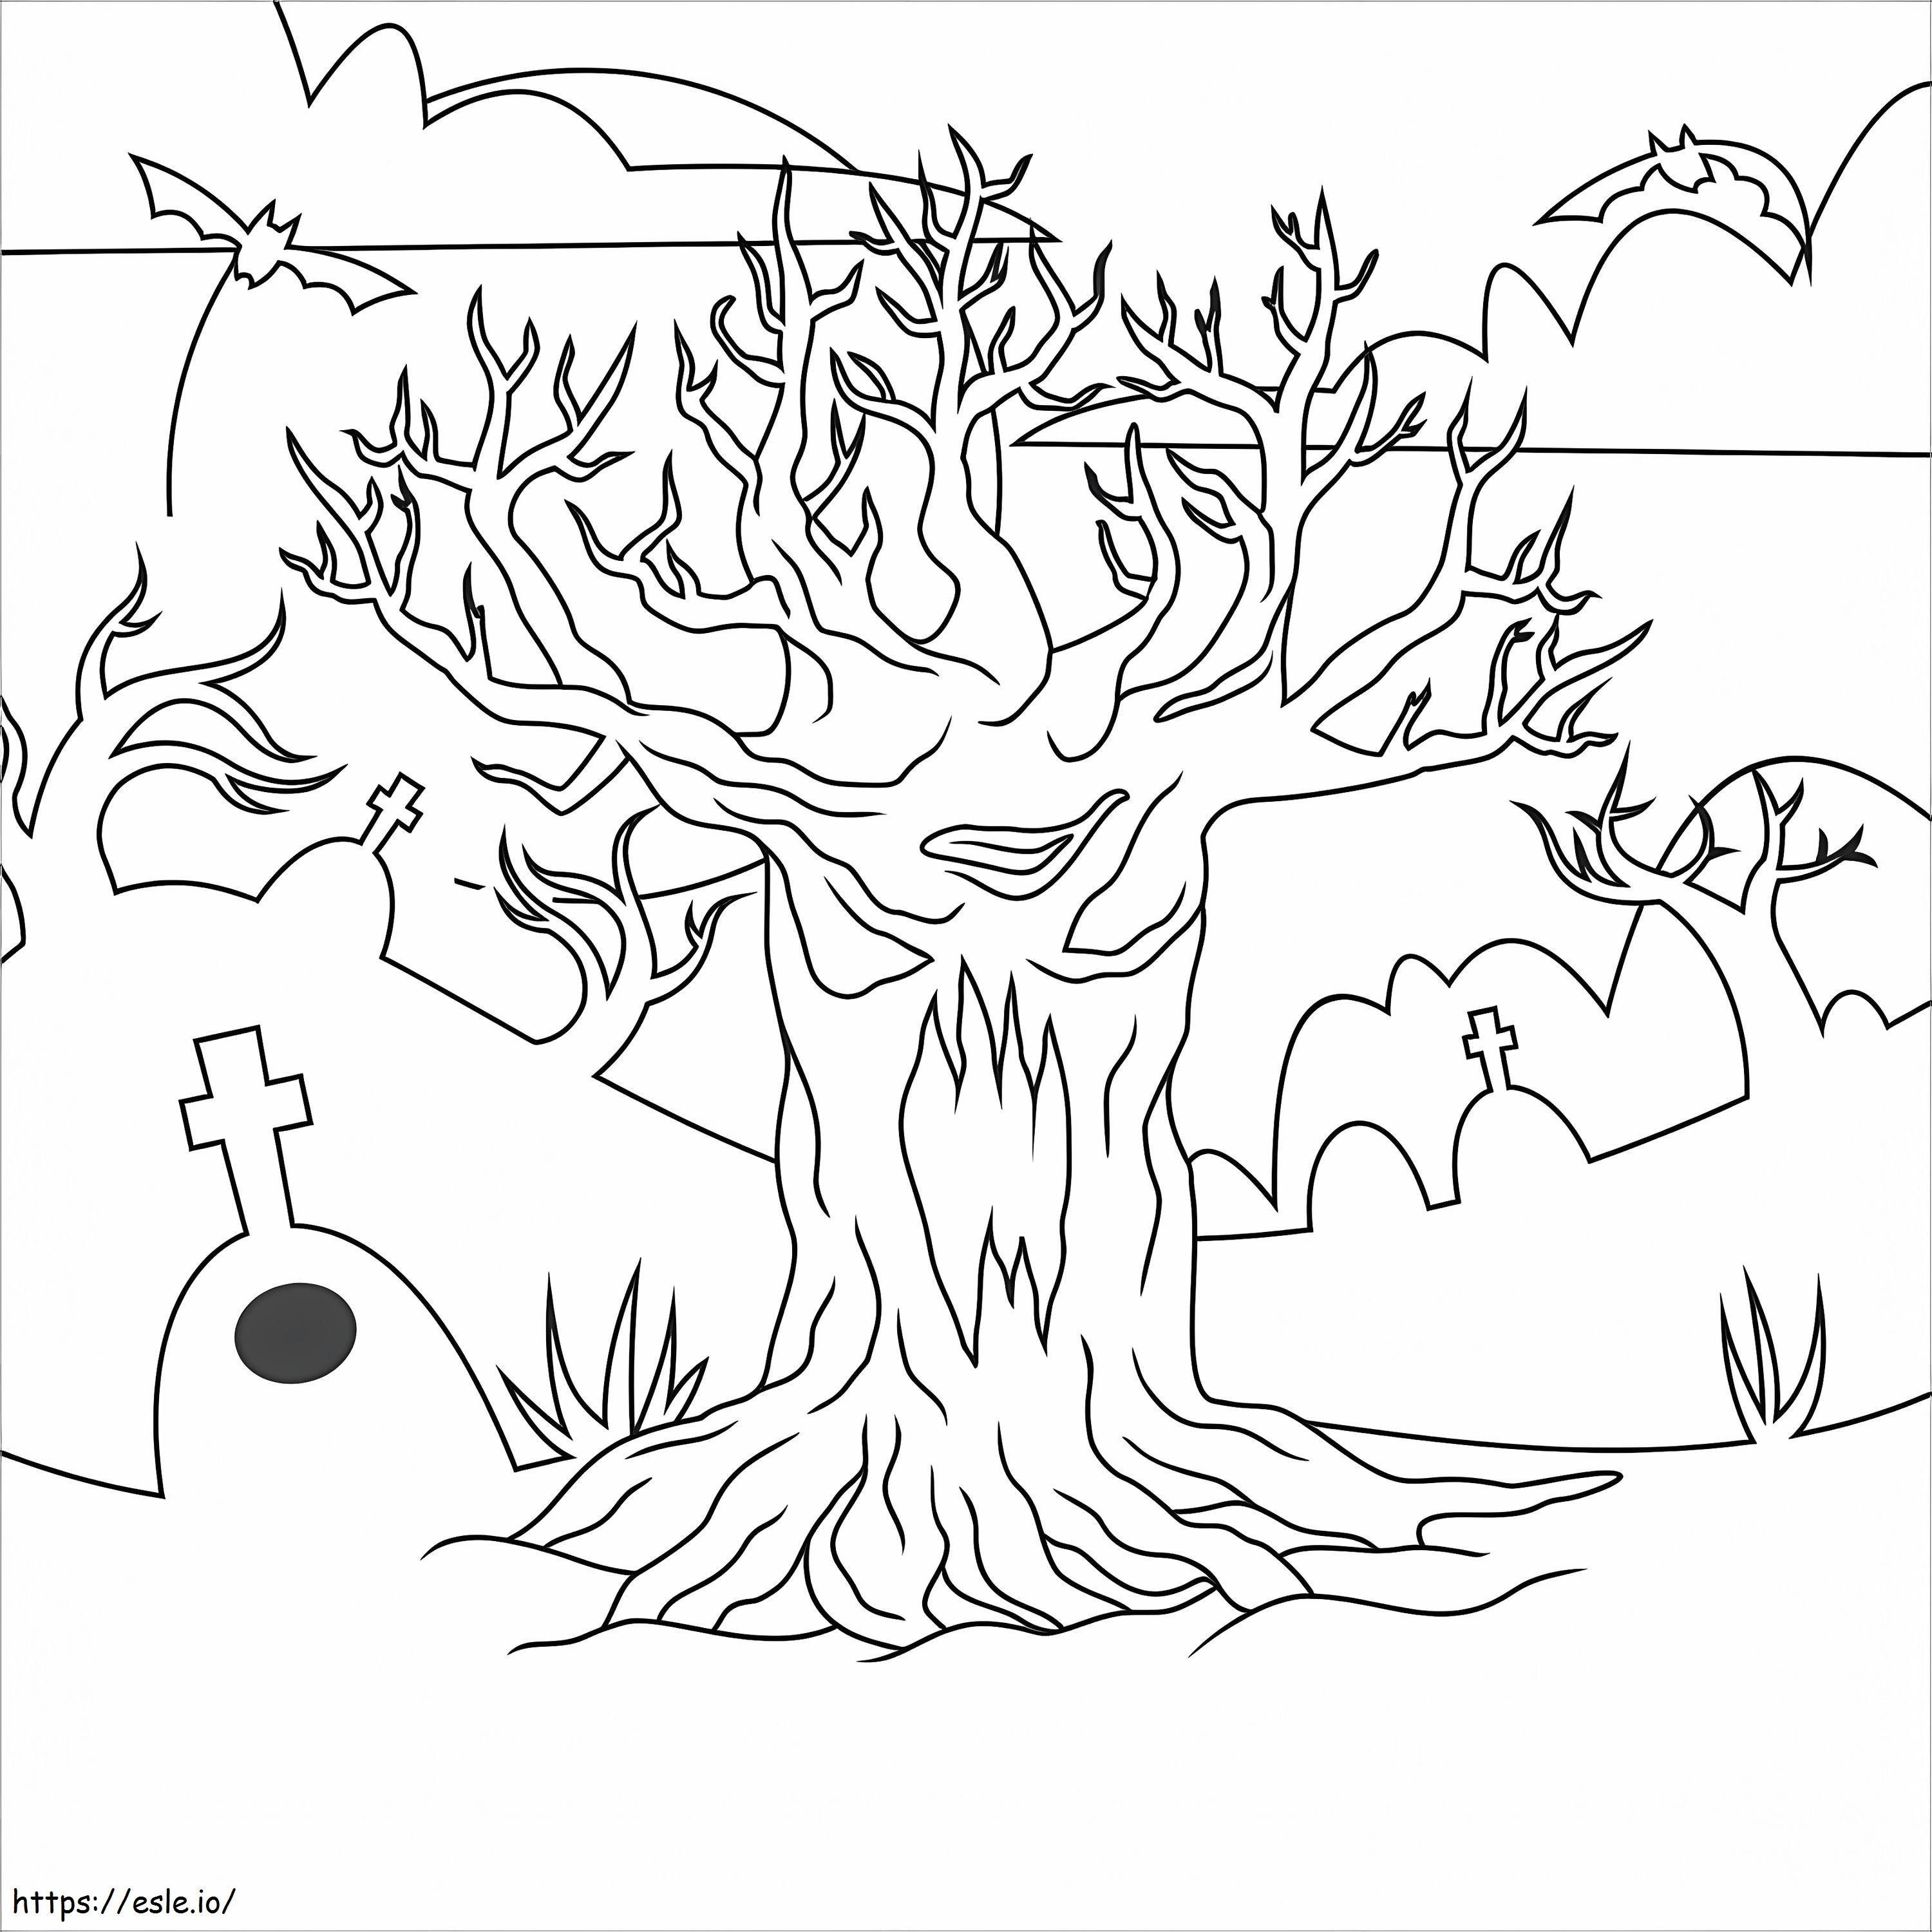 Evil Spooky Tree coloring page